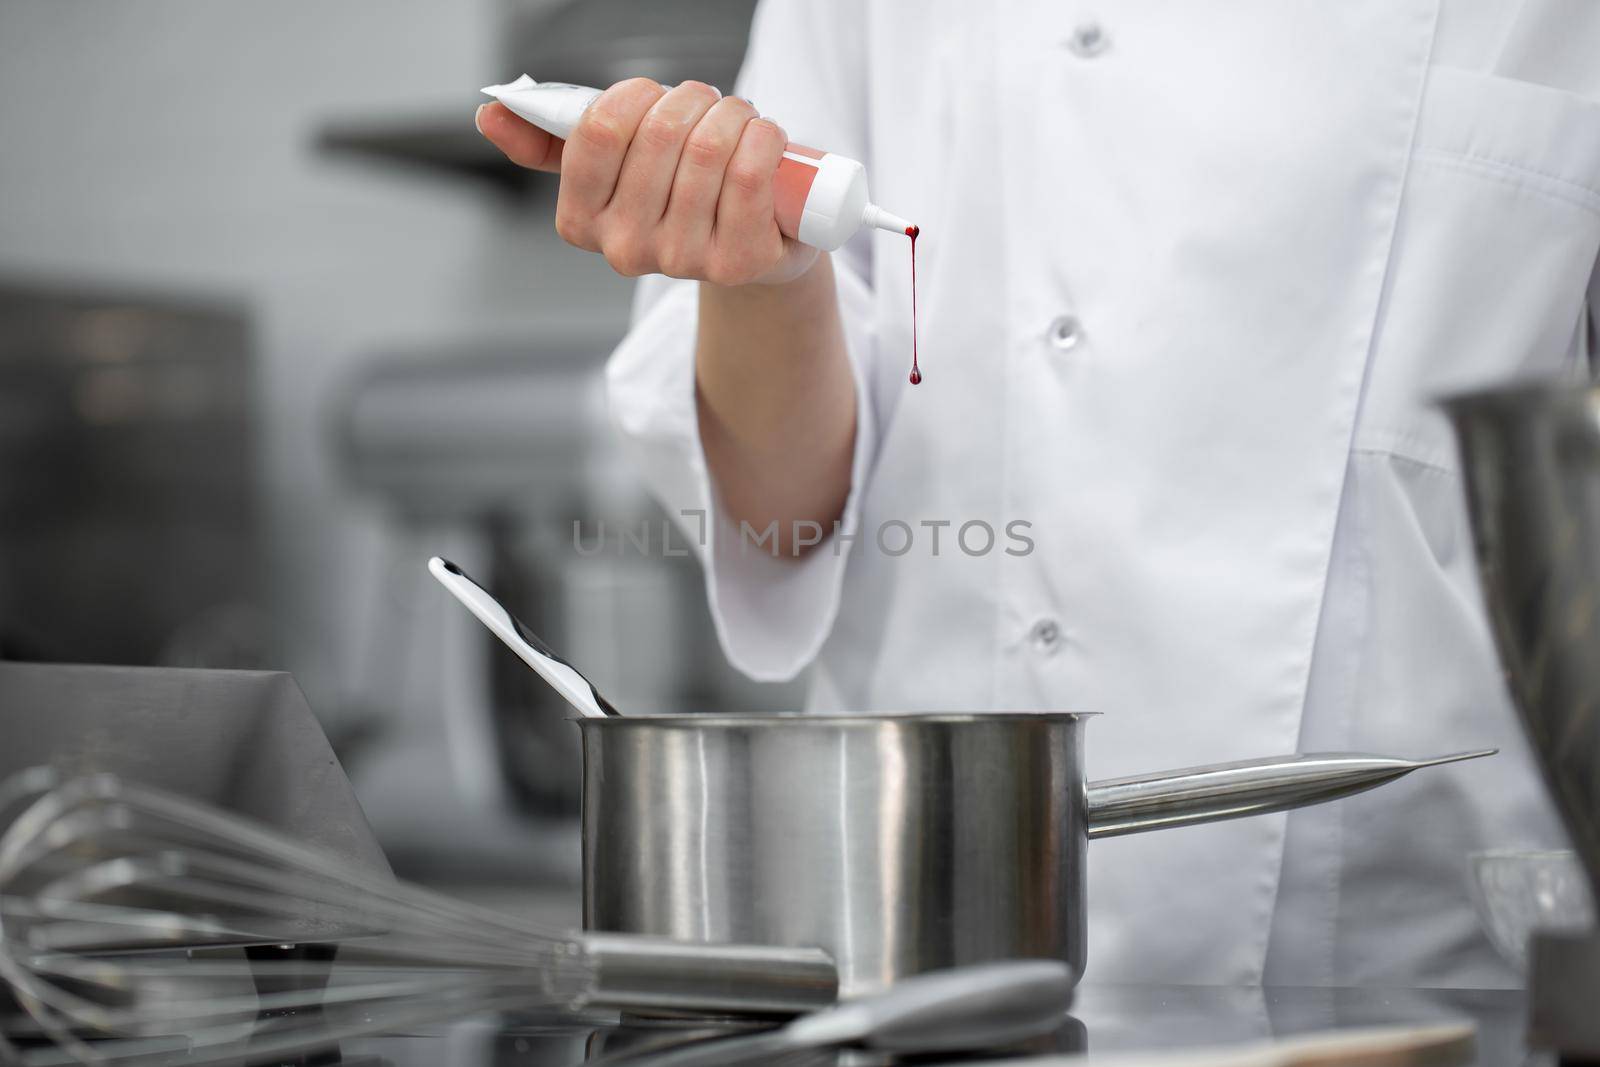 Pastry chef adds red dye to the filling for the cake.